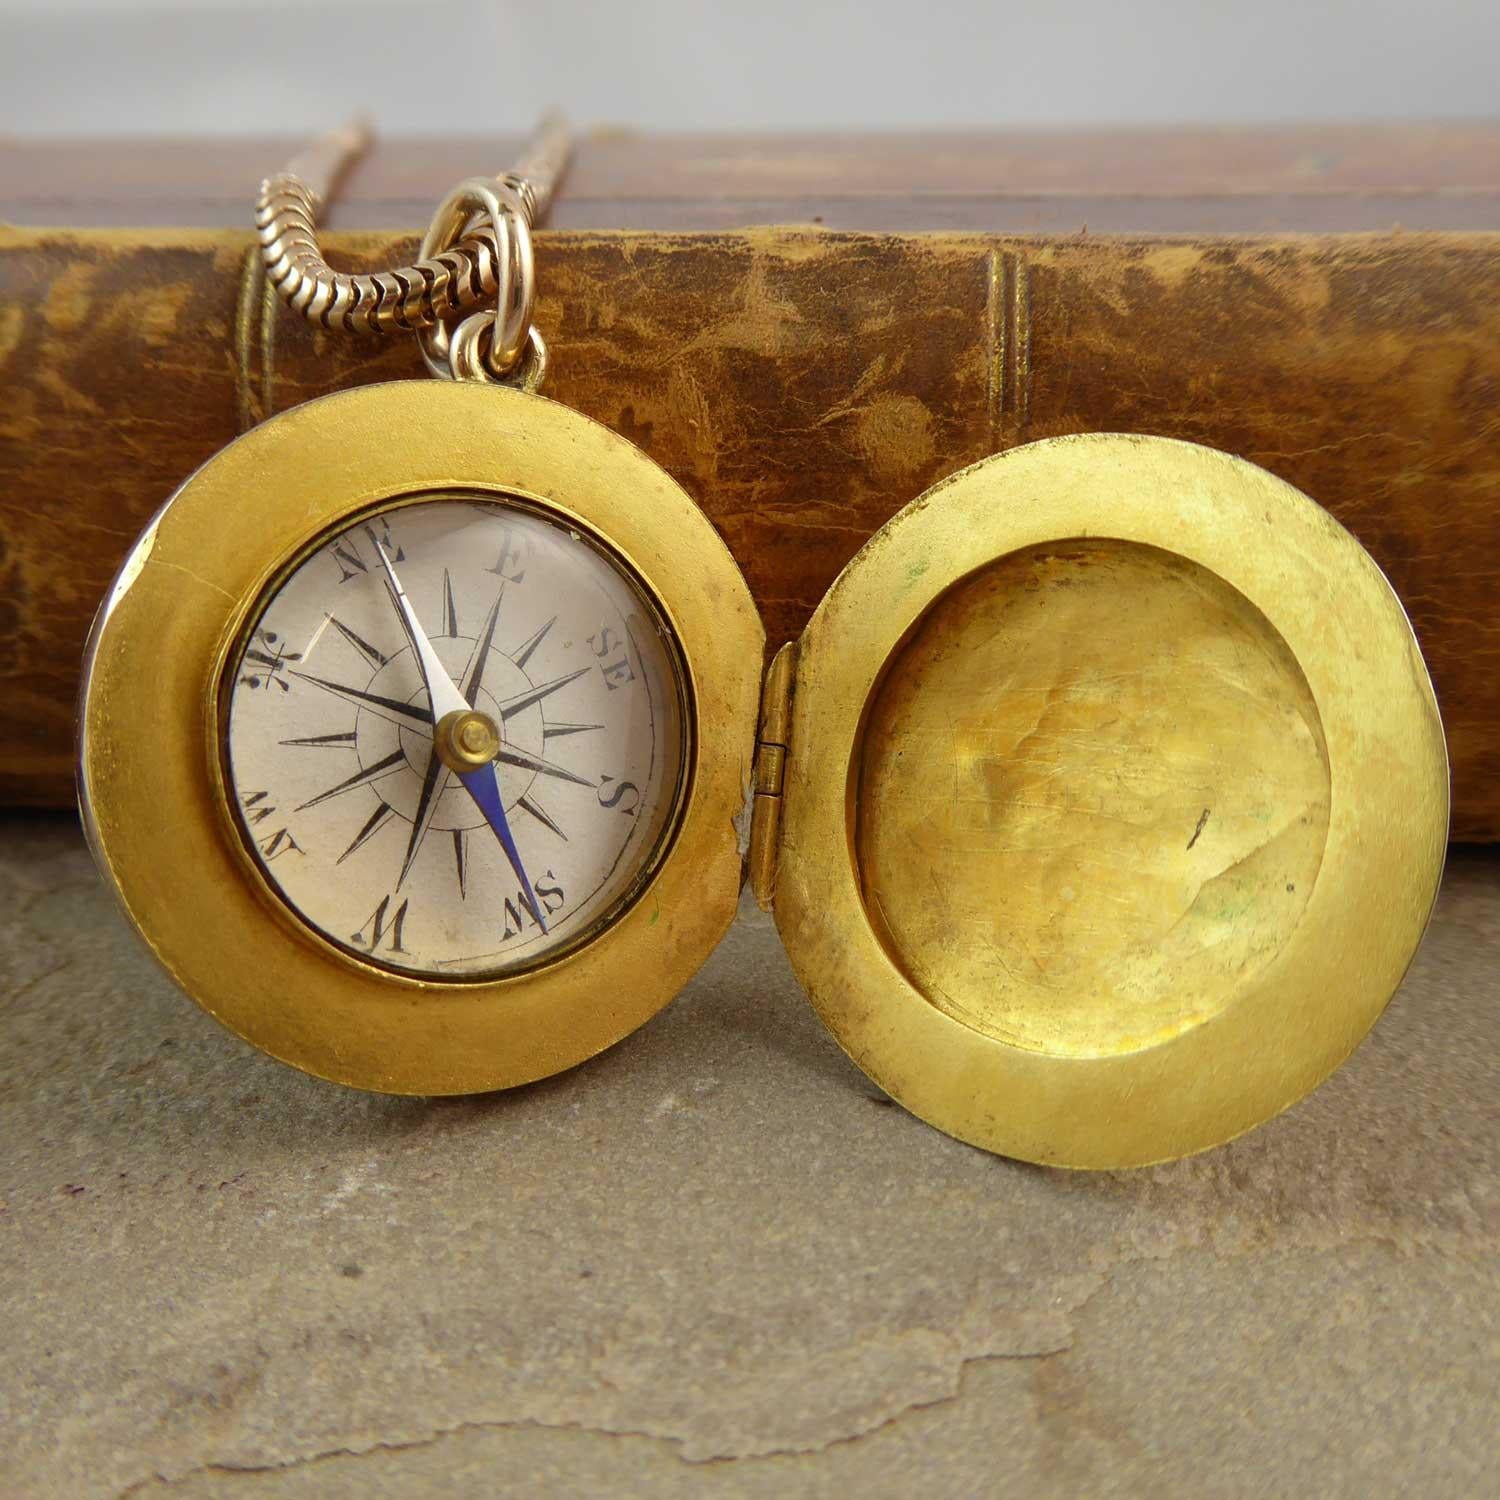 An antique gold locket of unusual design having one half opening to reveal and portrait/keepsake compartment and the other half opens to reveal a compass. Circular in shape and with a slight dome, both the front and back of the locket have a pretty